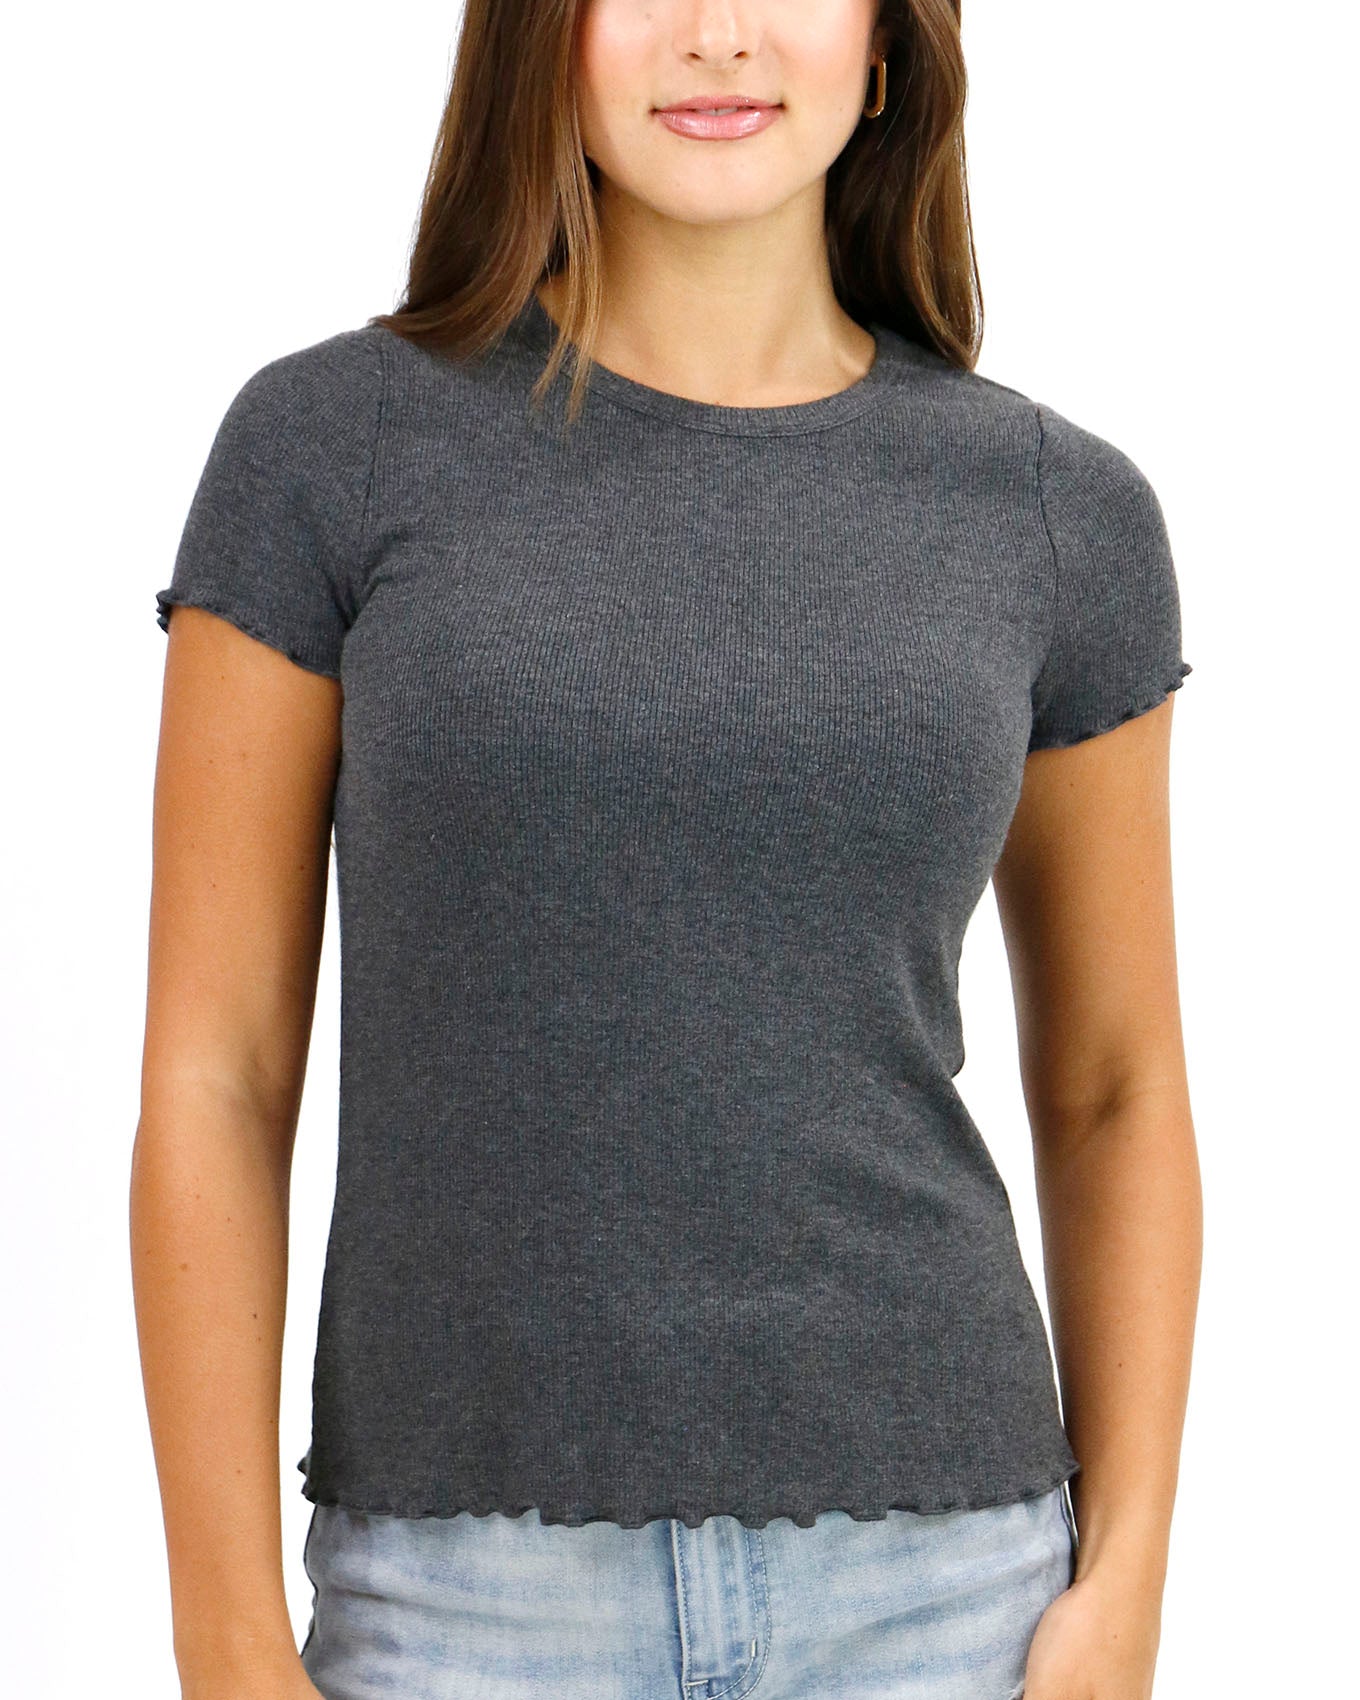 Ribbed Tee Charcoal Front